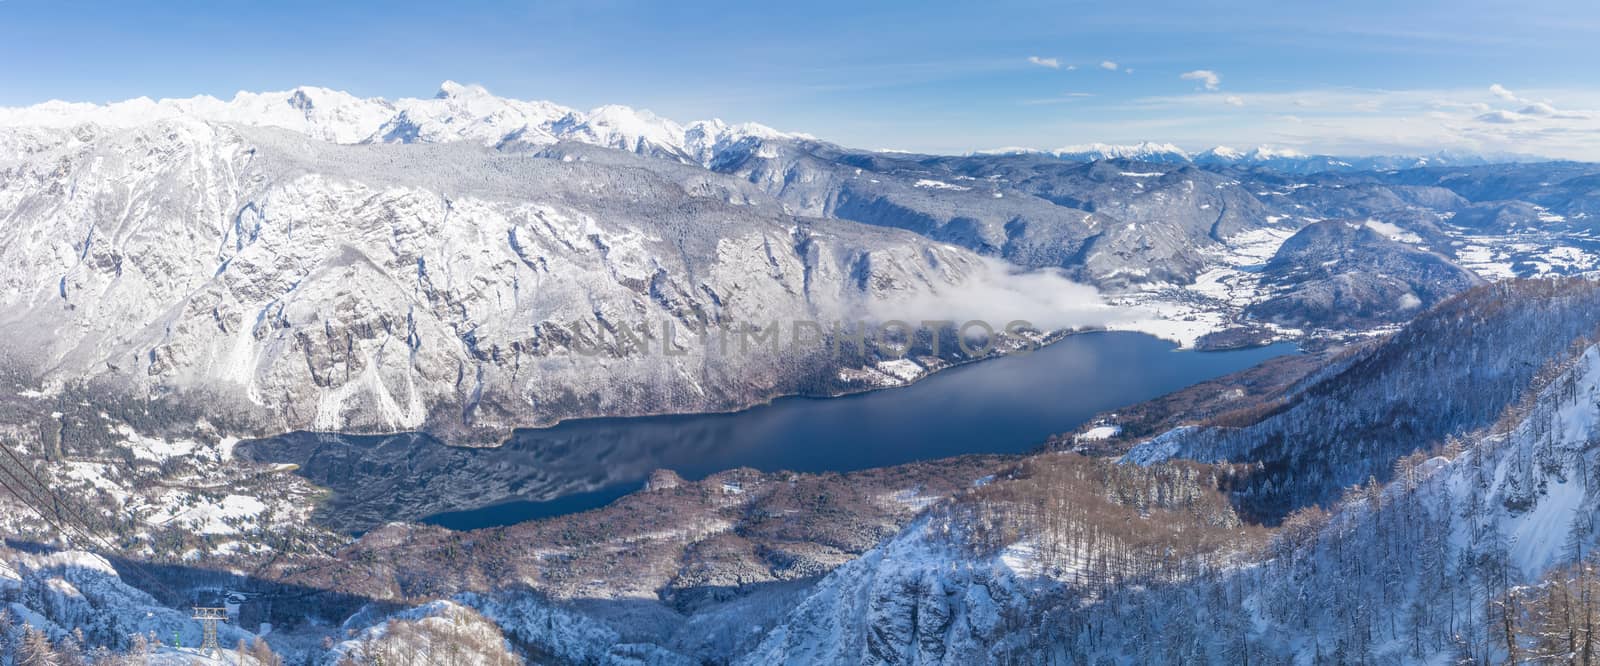 A view of the Lake Bohinj and the surrounding mountains in winter.